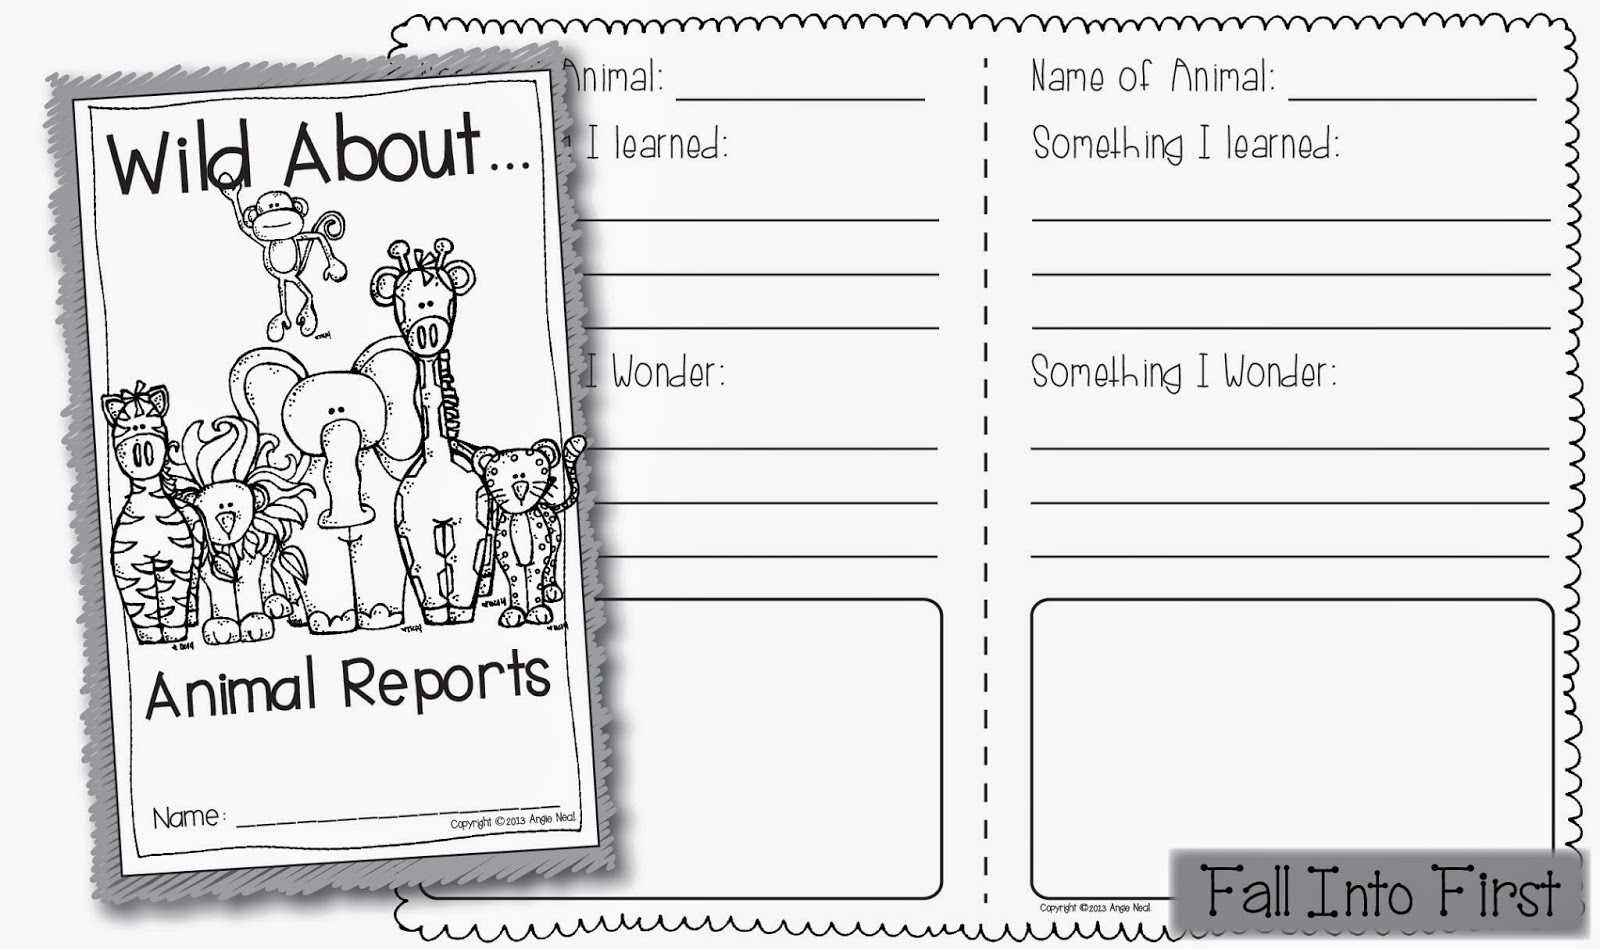 Cat Classification Worksheet | Printable Worksheets And With Animal Report Template